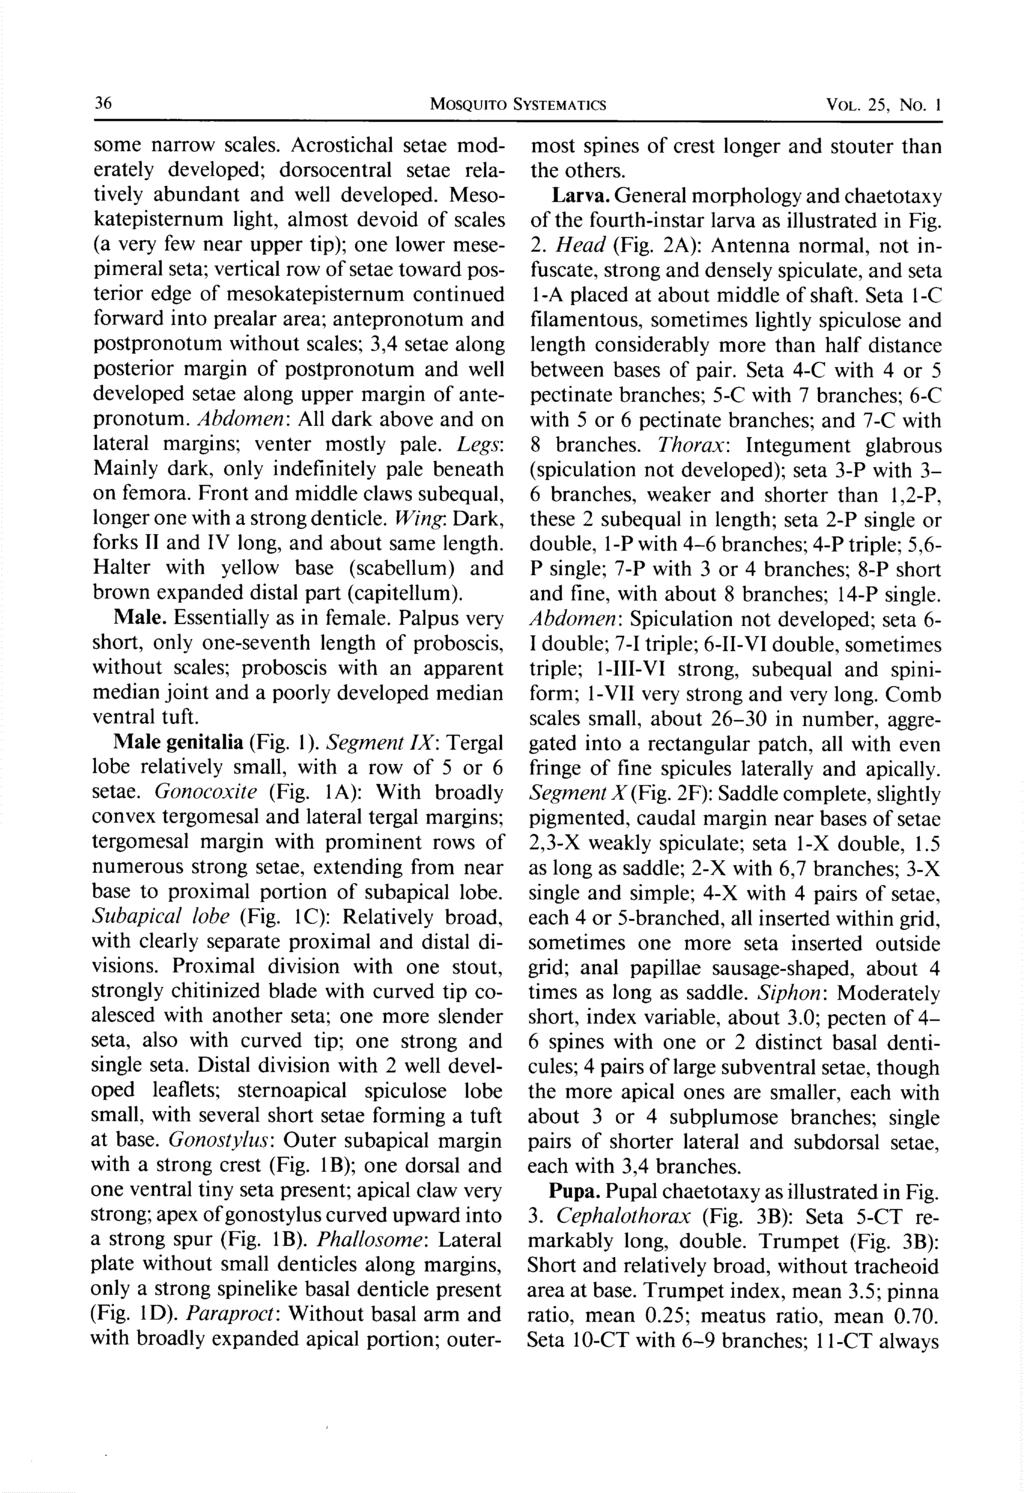 36 MOSQUITO SYSTEMATICS VOL. 25, No. 1 some narrow scales. Acrostichal setae moderately developed; dorsocentral setae relatively abundant and well developed.